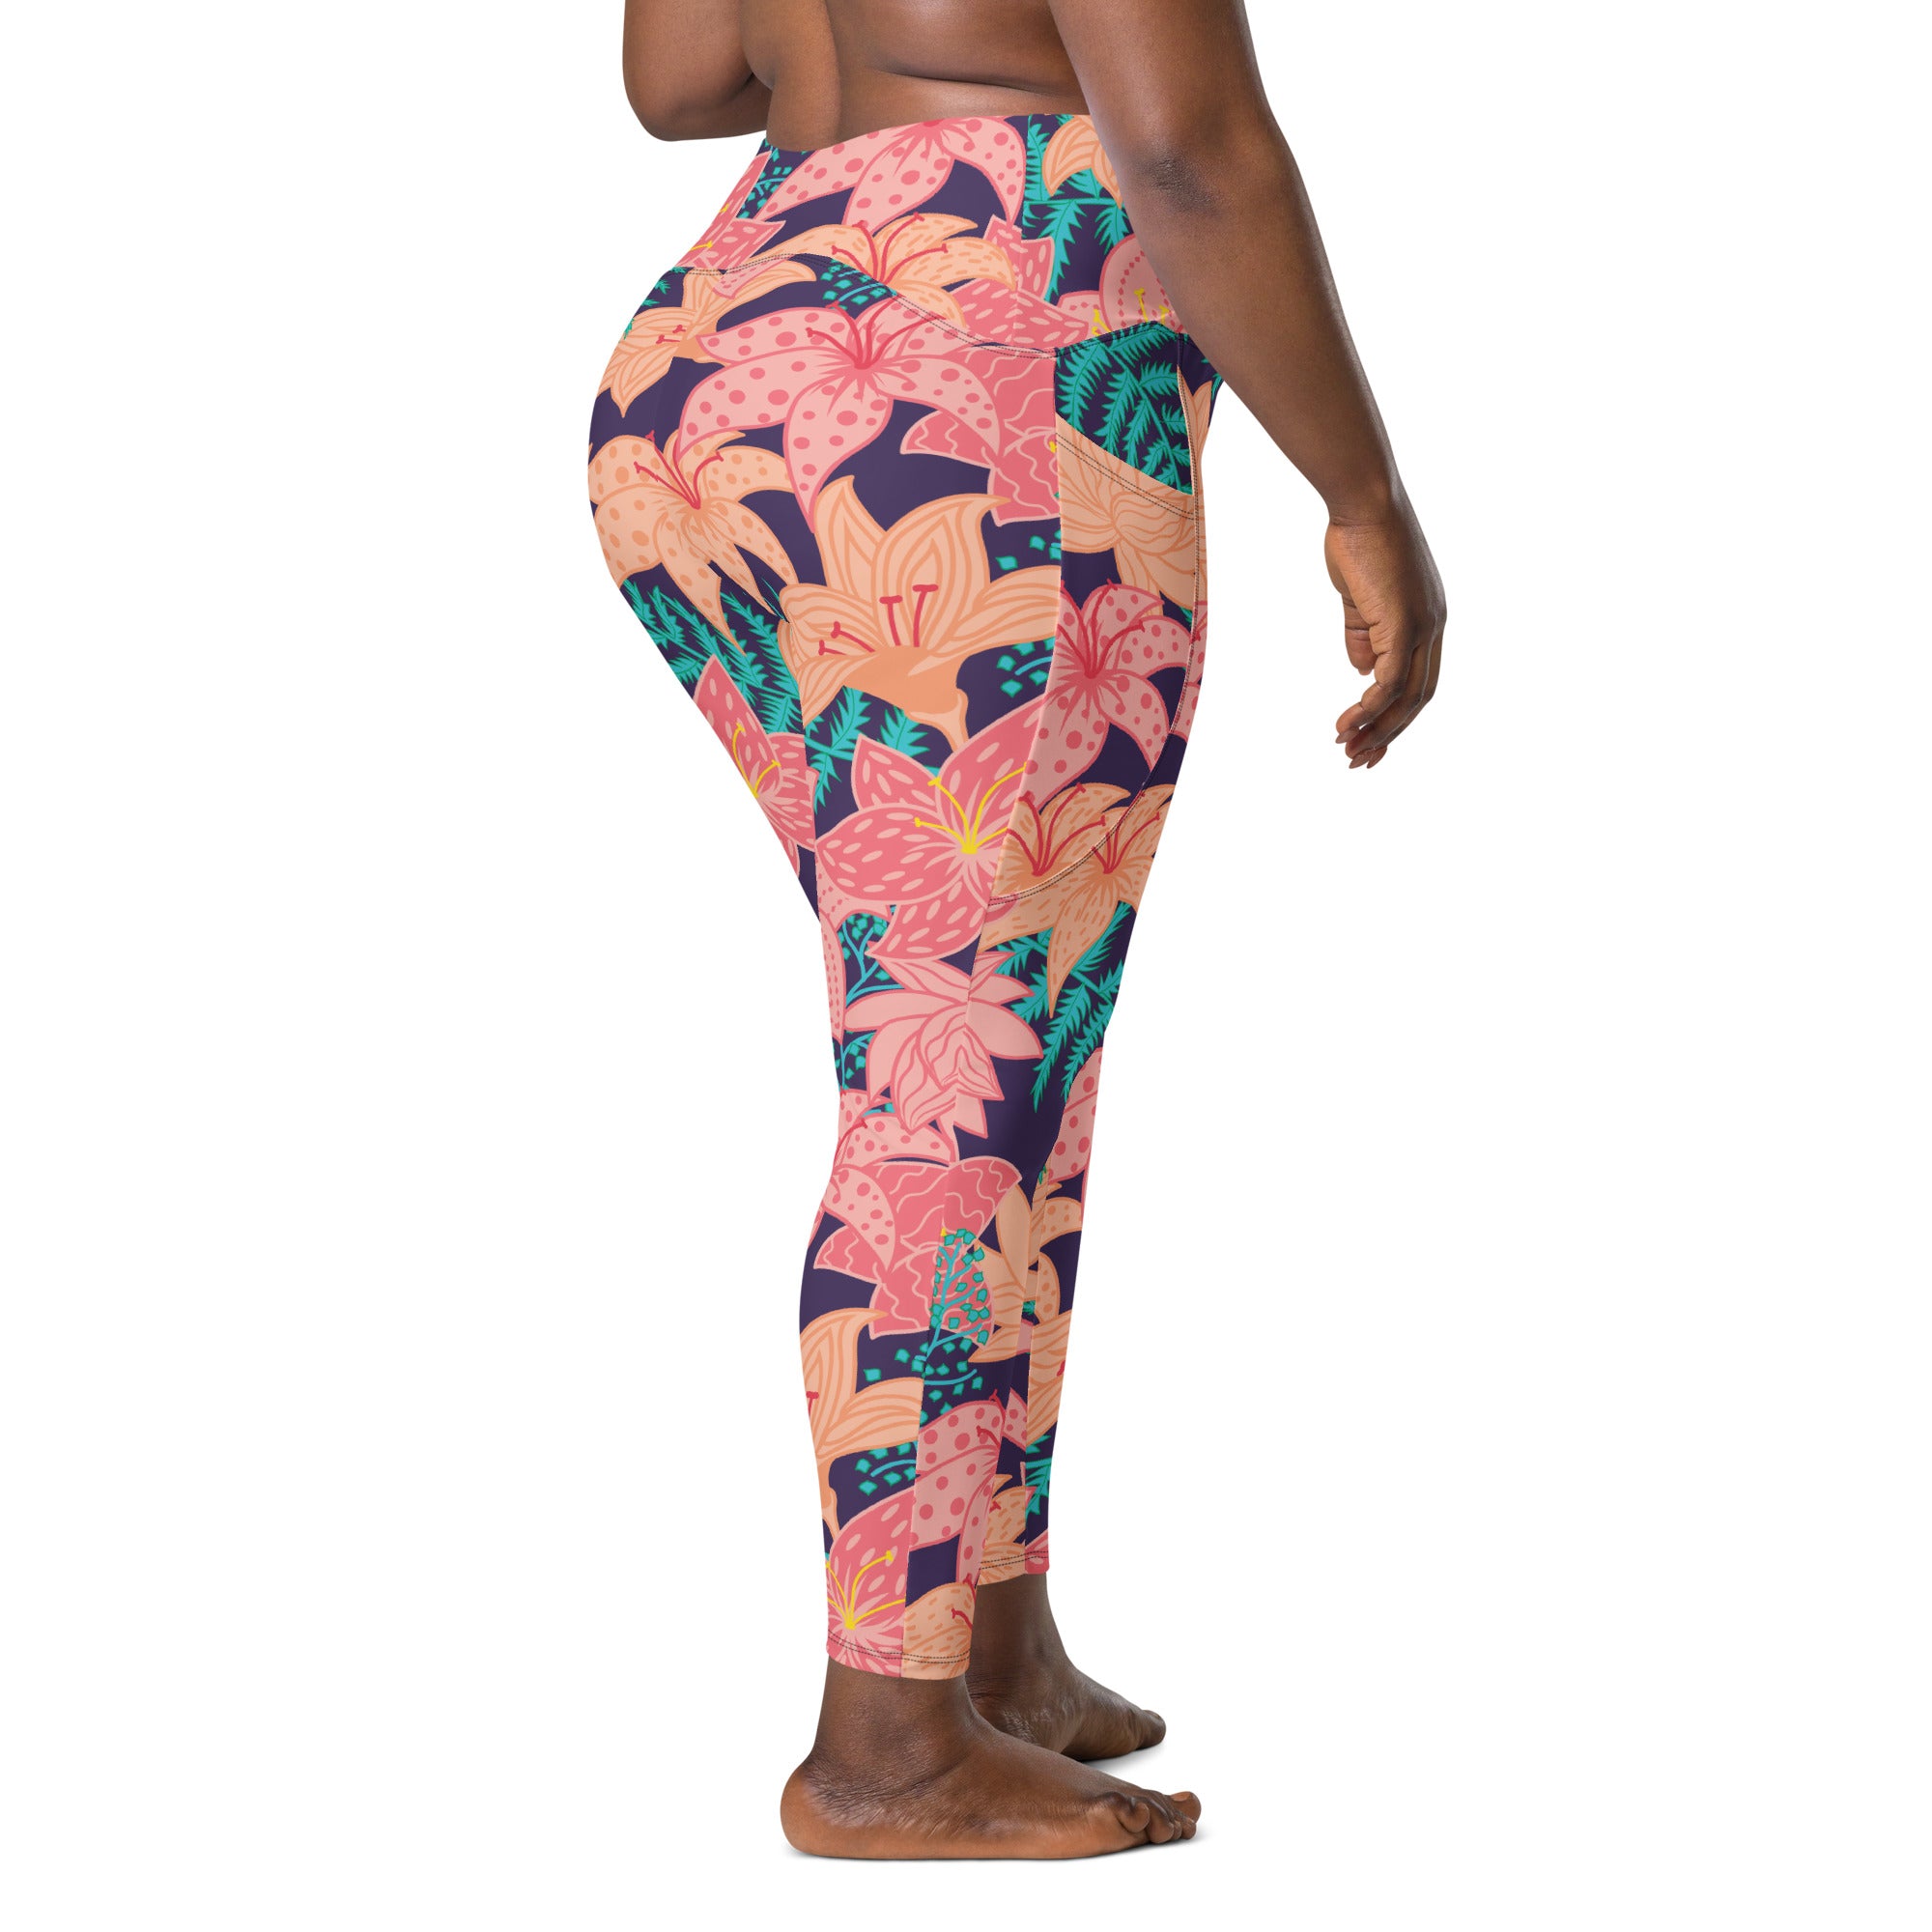 Island Nectar Plus Size Crossover Leggings with Pockets